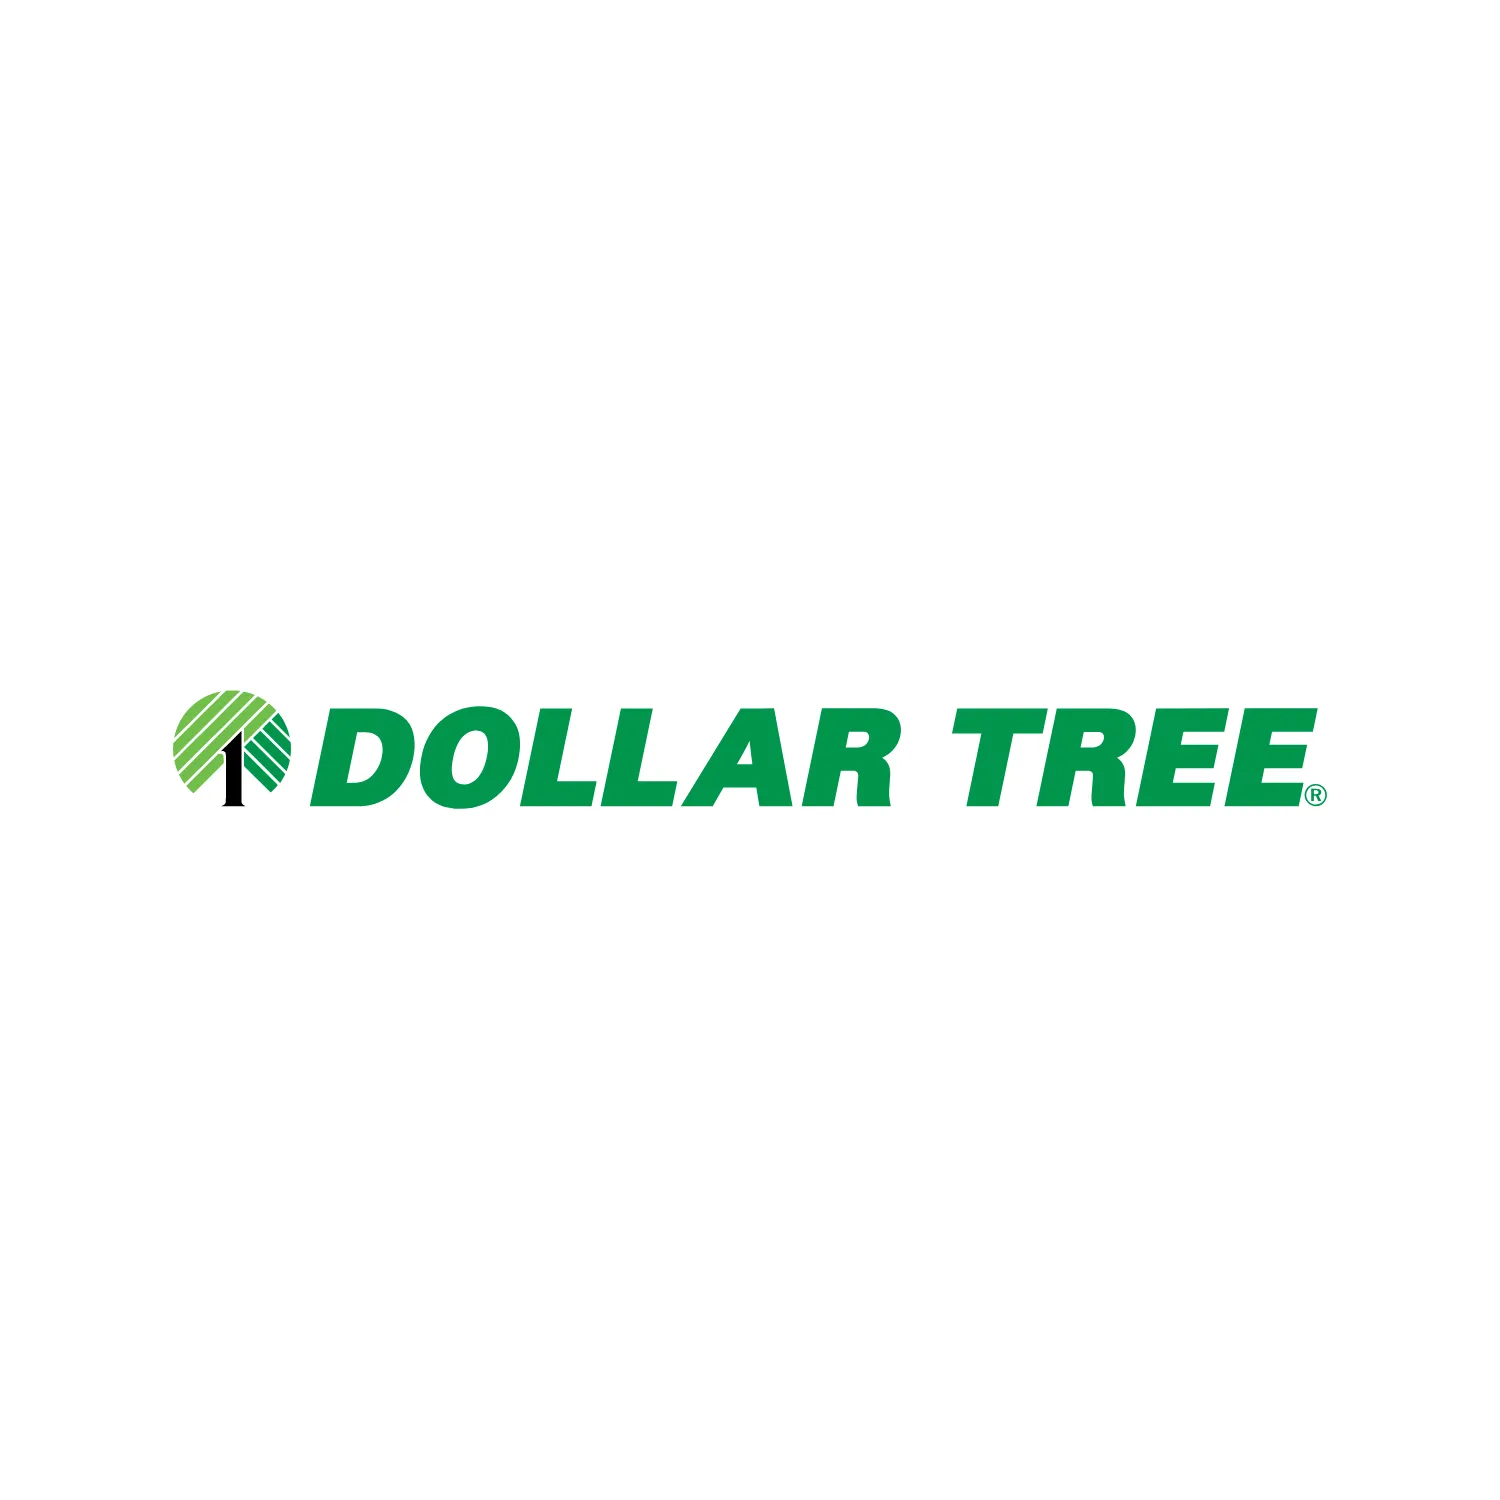 Database of Dollar Tree Locations in the United States